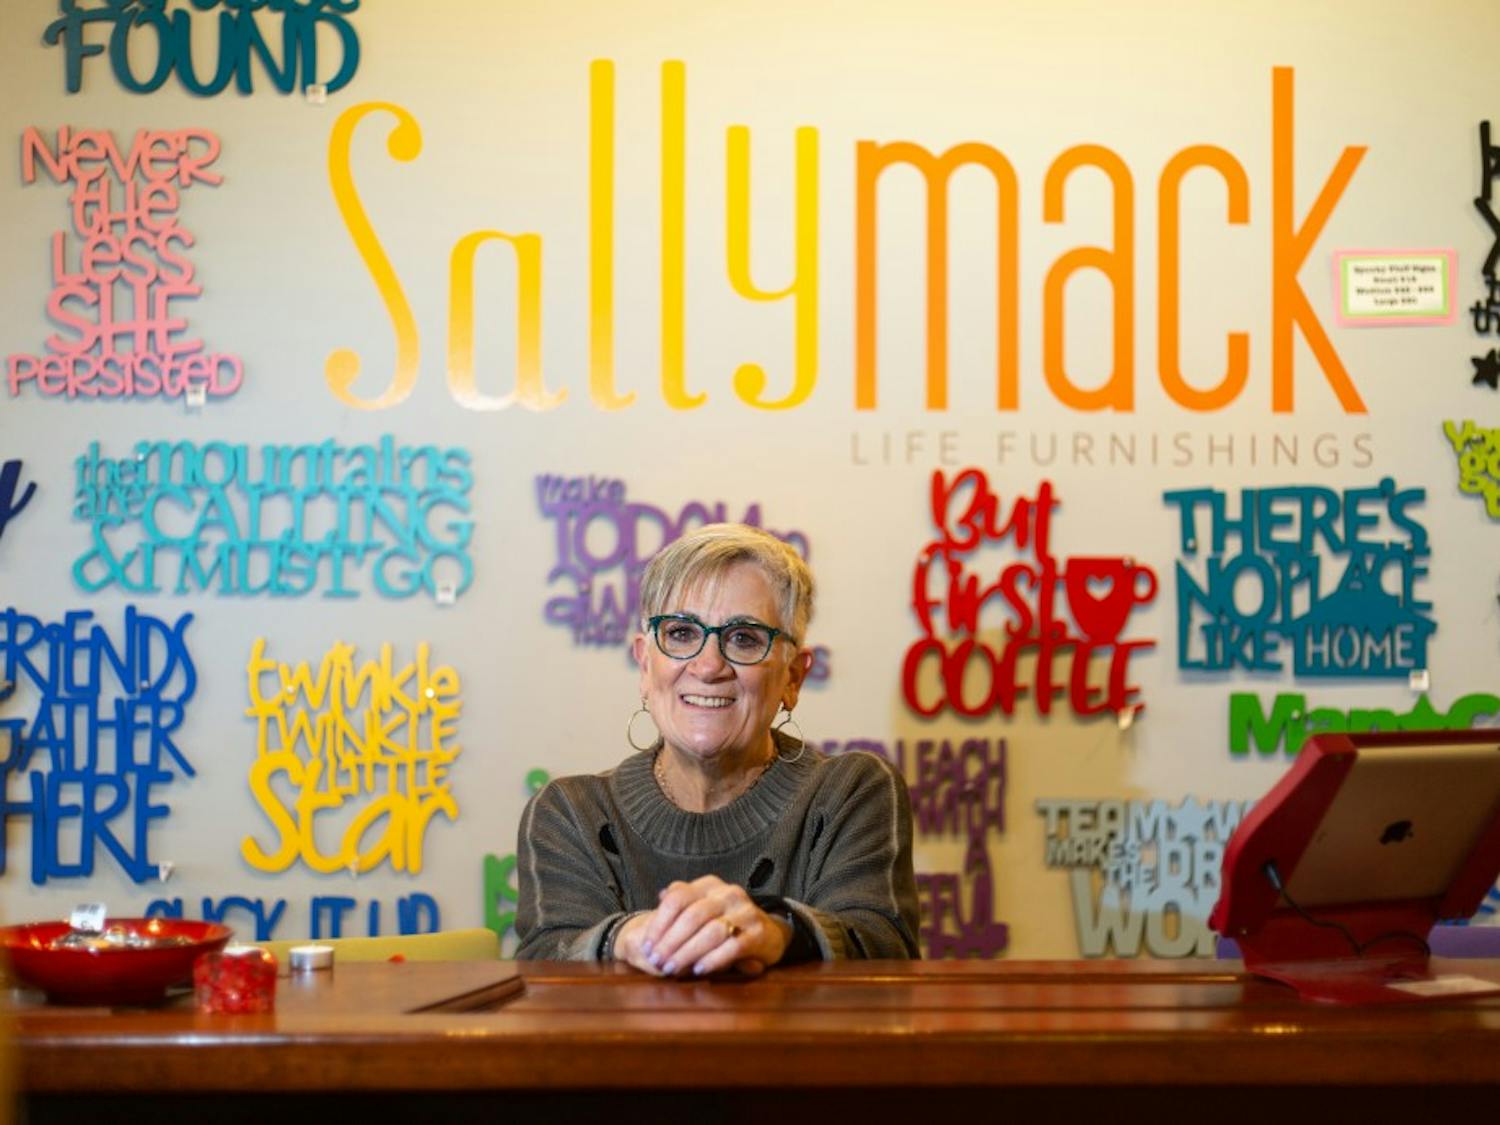 Sally Stollmack is the owner of SallyMack, a lifestyle boutique in Chapel Hill's Midtown Market that has been open since 2014.